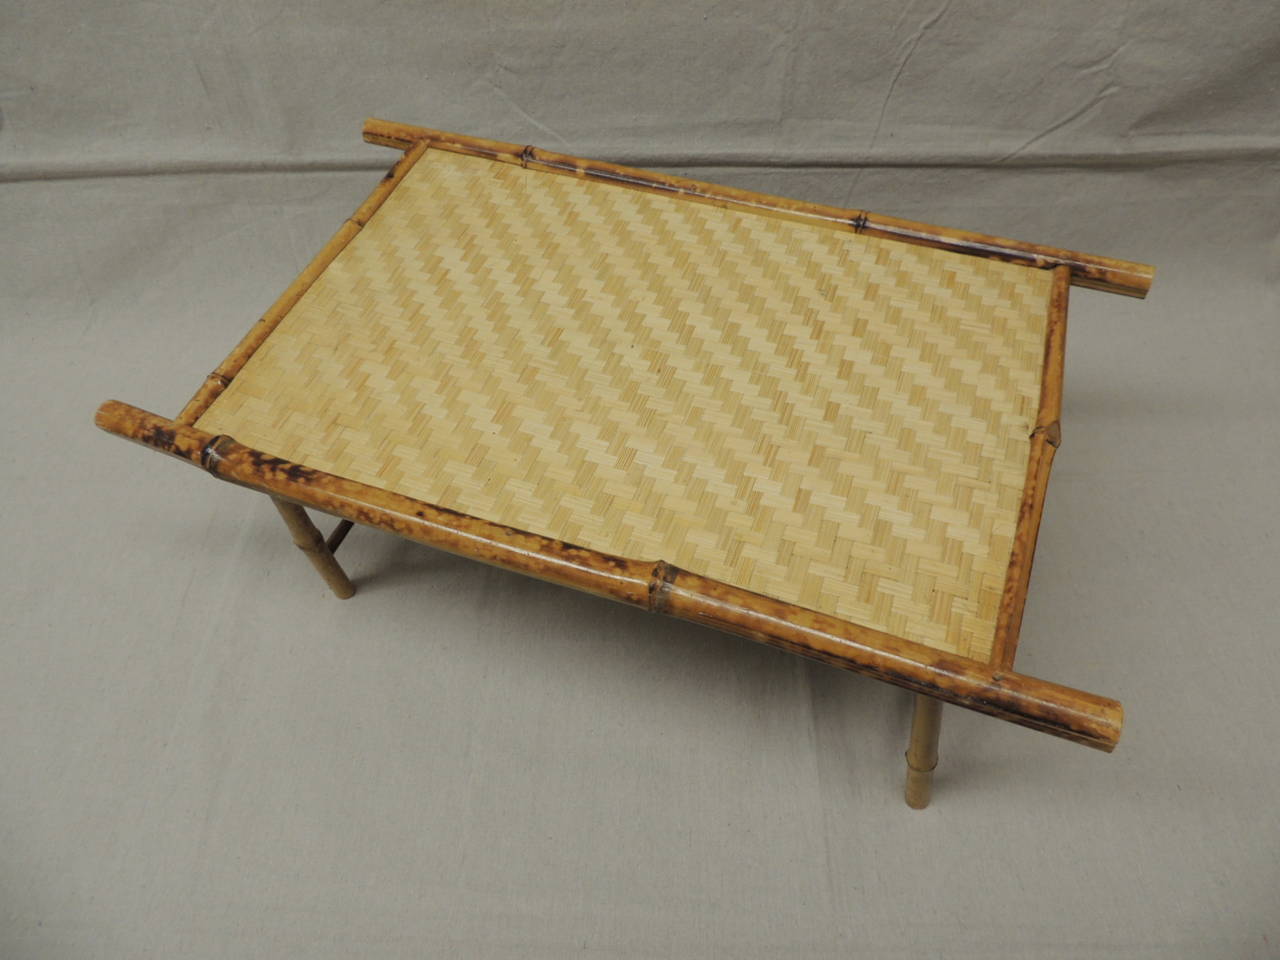 Vintage bamboo folding breakfast tray with basket weave detail top.